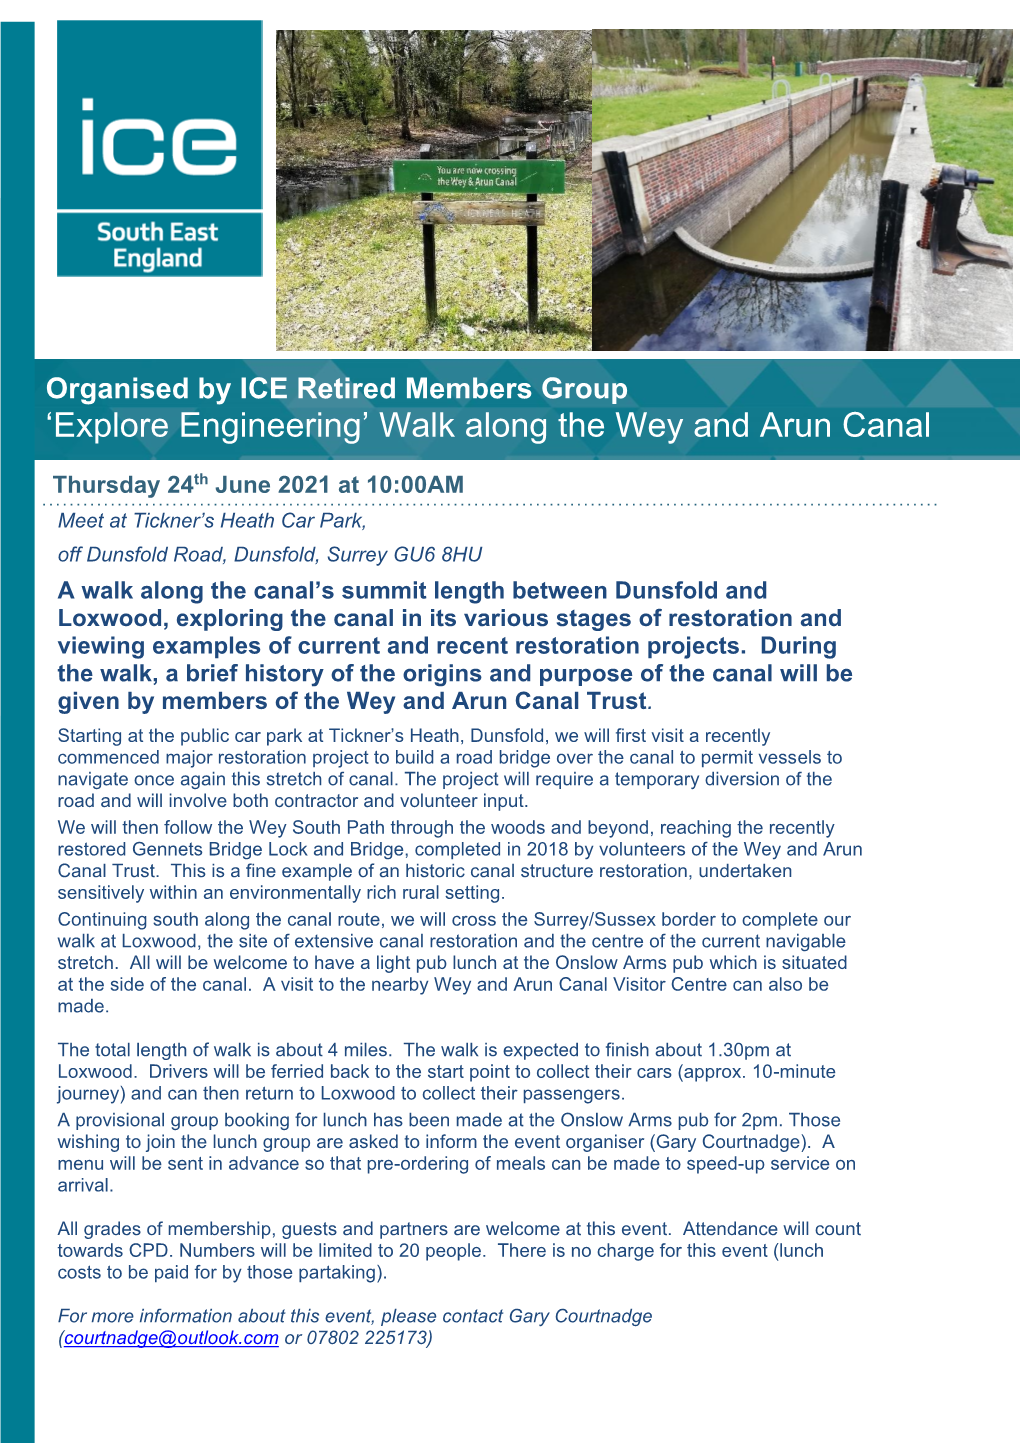 'Explore Engineering' Walk Along the Wey and Arun Canal